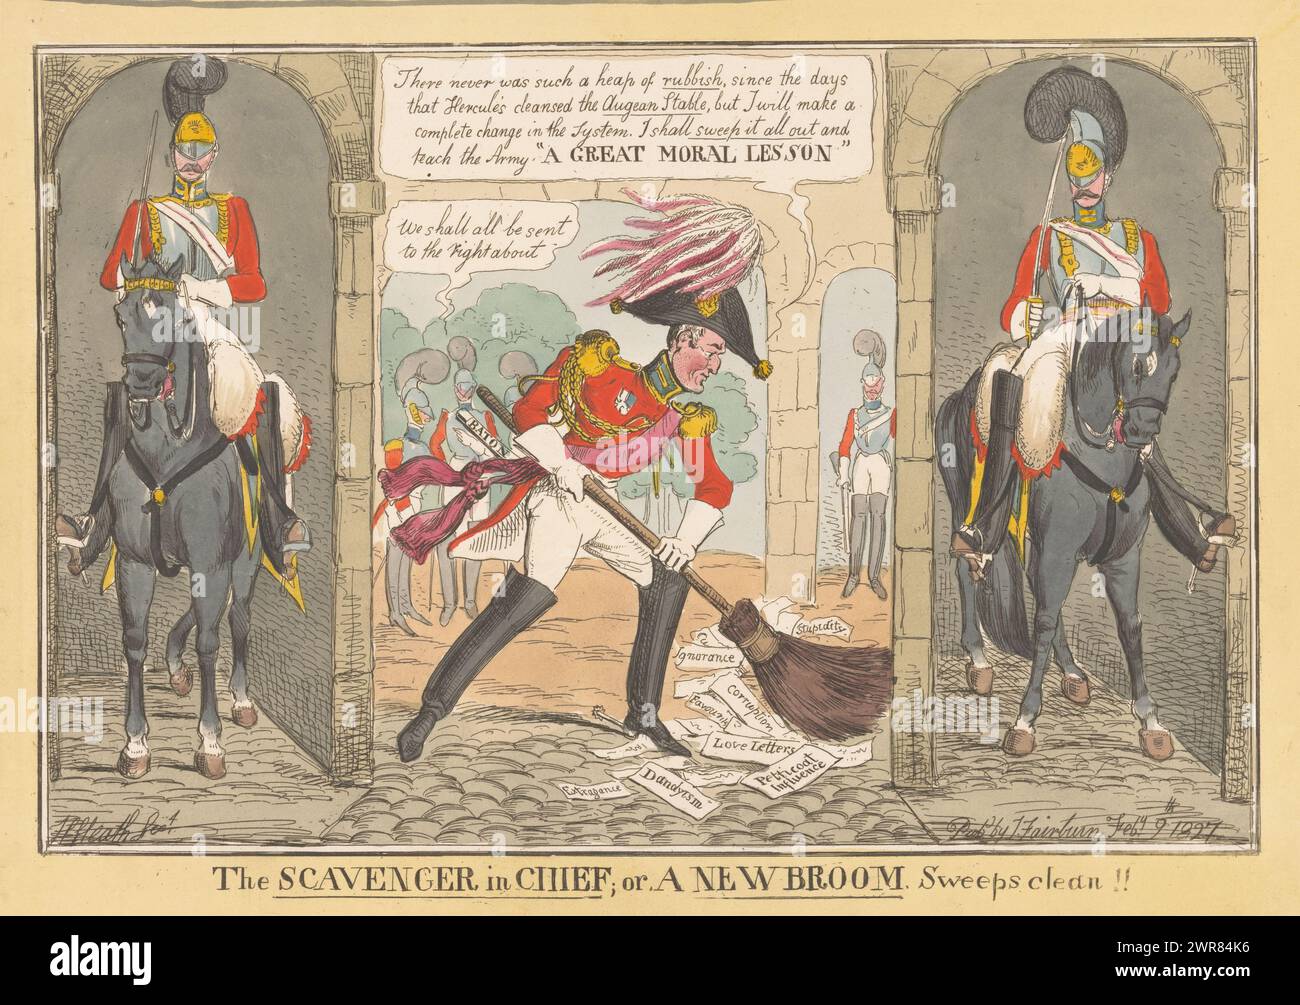 Cartoon with the Duke of Wellington, 1827, The Scavenger in Chief; or a New Broom Sweeps clean !!, Cartoon with the Duke of Wellington who comes to clean up the army. With a broom he fanatically sweeps papers with all kinds of inscriptions from the street, 1827. Left and right cavalry with 'Horse Guards'., print maker: Henry Heath, publisher: John Fairburn, print maker: England, publisher: London, 9-Feb-1827, paper, etching, height 250 mm × width 352 mm Stock Photo